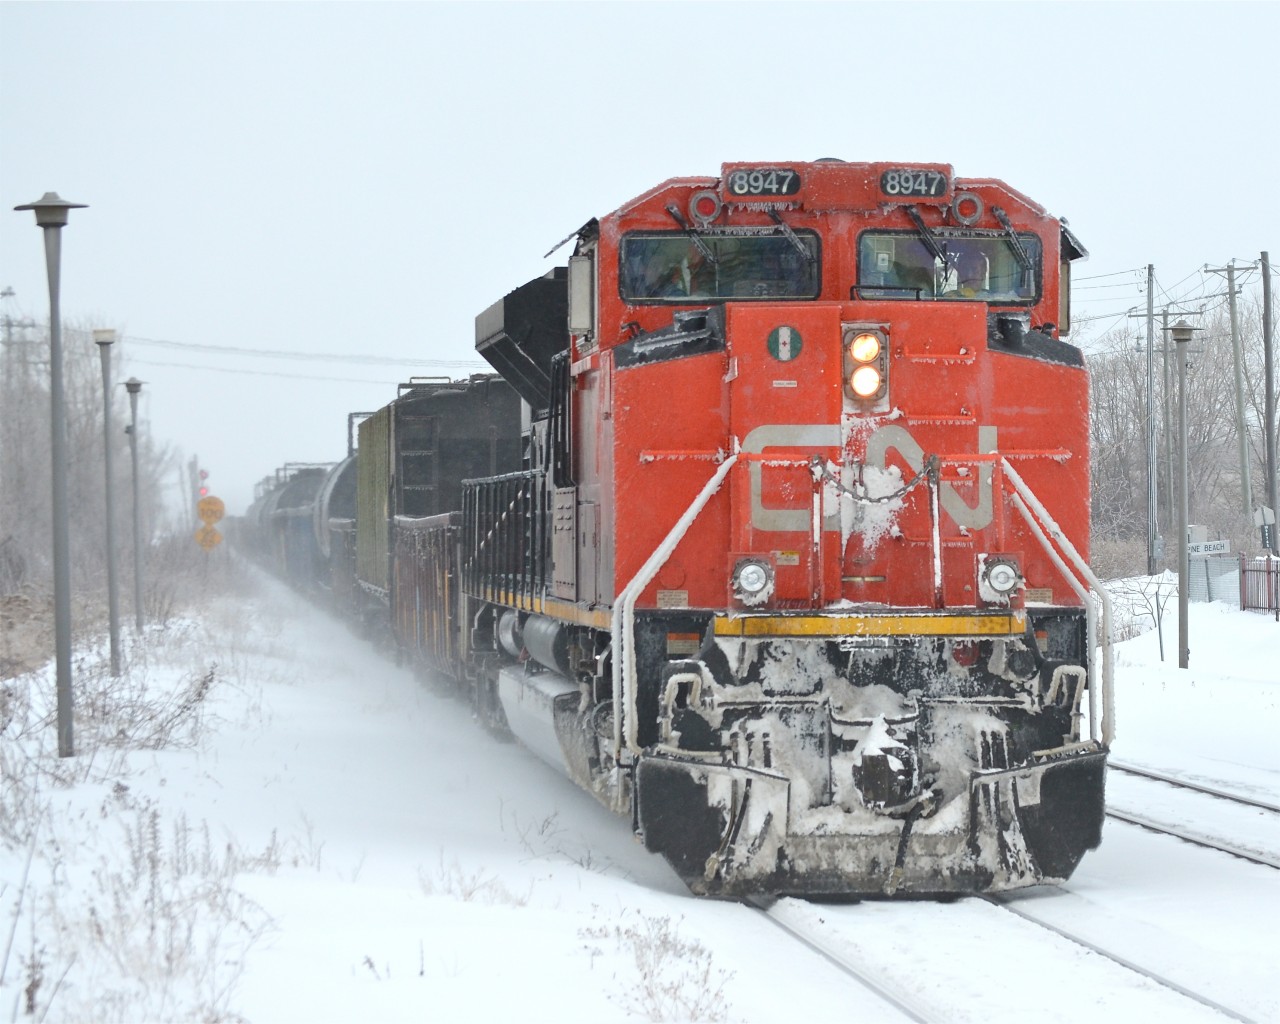 A late CN 310 passes through Dorval with CN 8947 leading and IC 2717 as the DPU. For more train photos, check out http://www.flickr.com/photos/mtlwestrailfan/